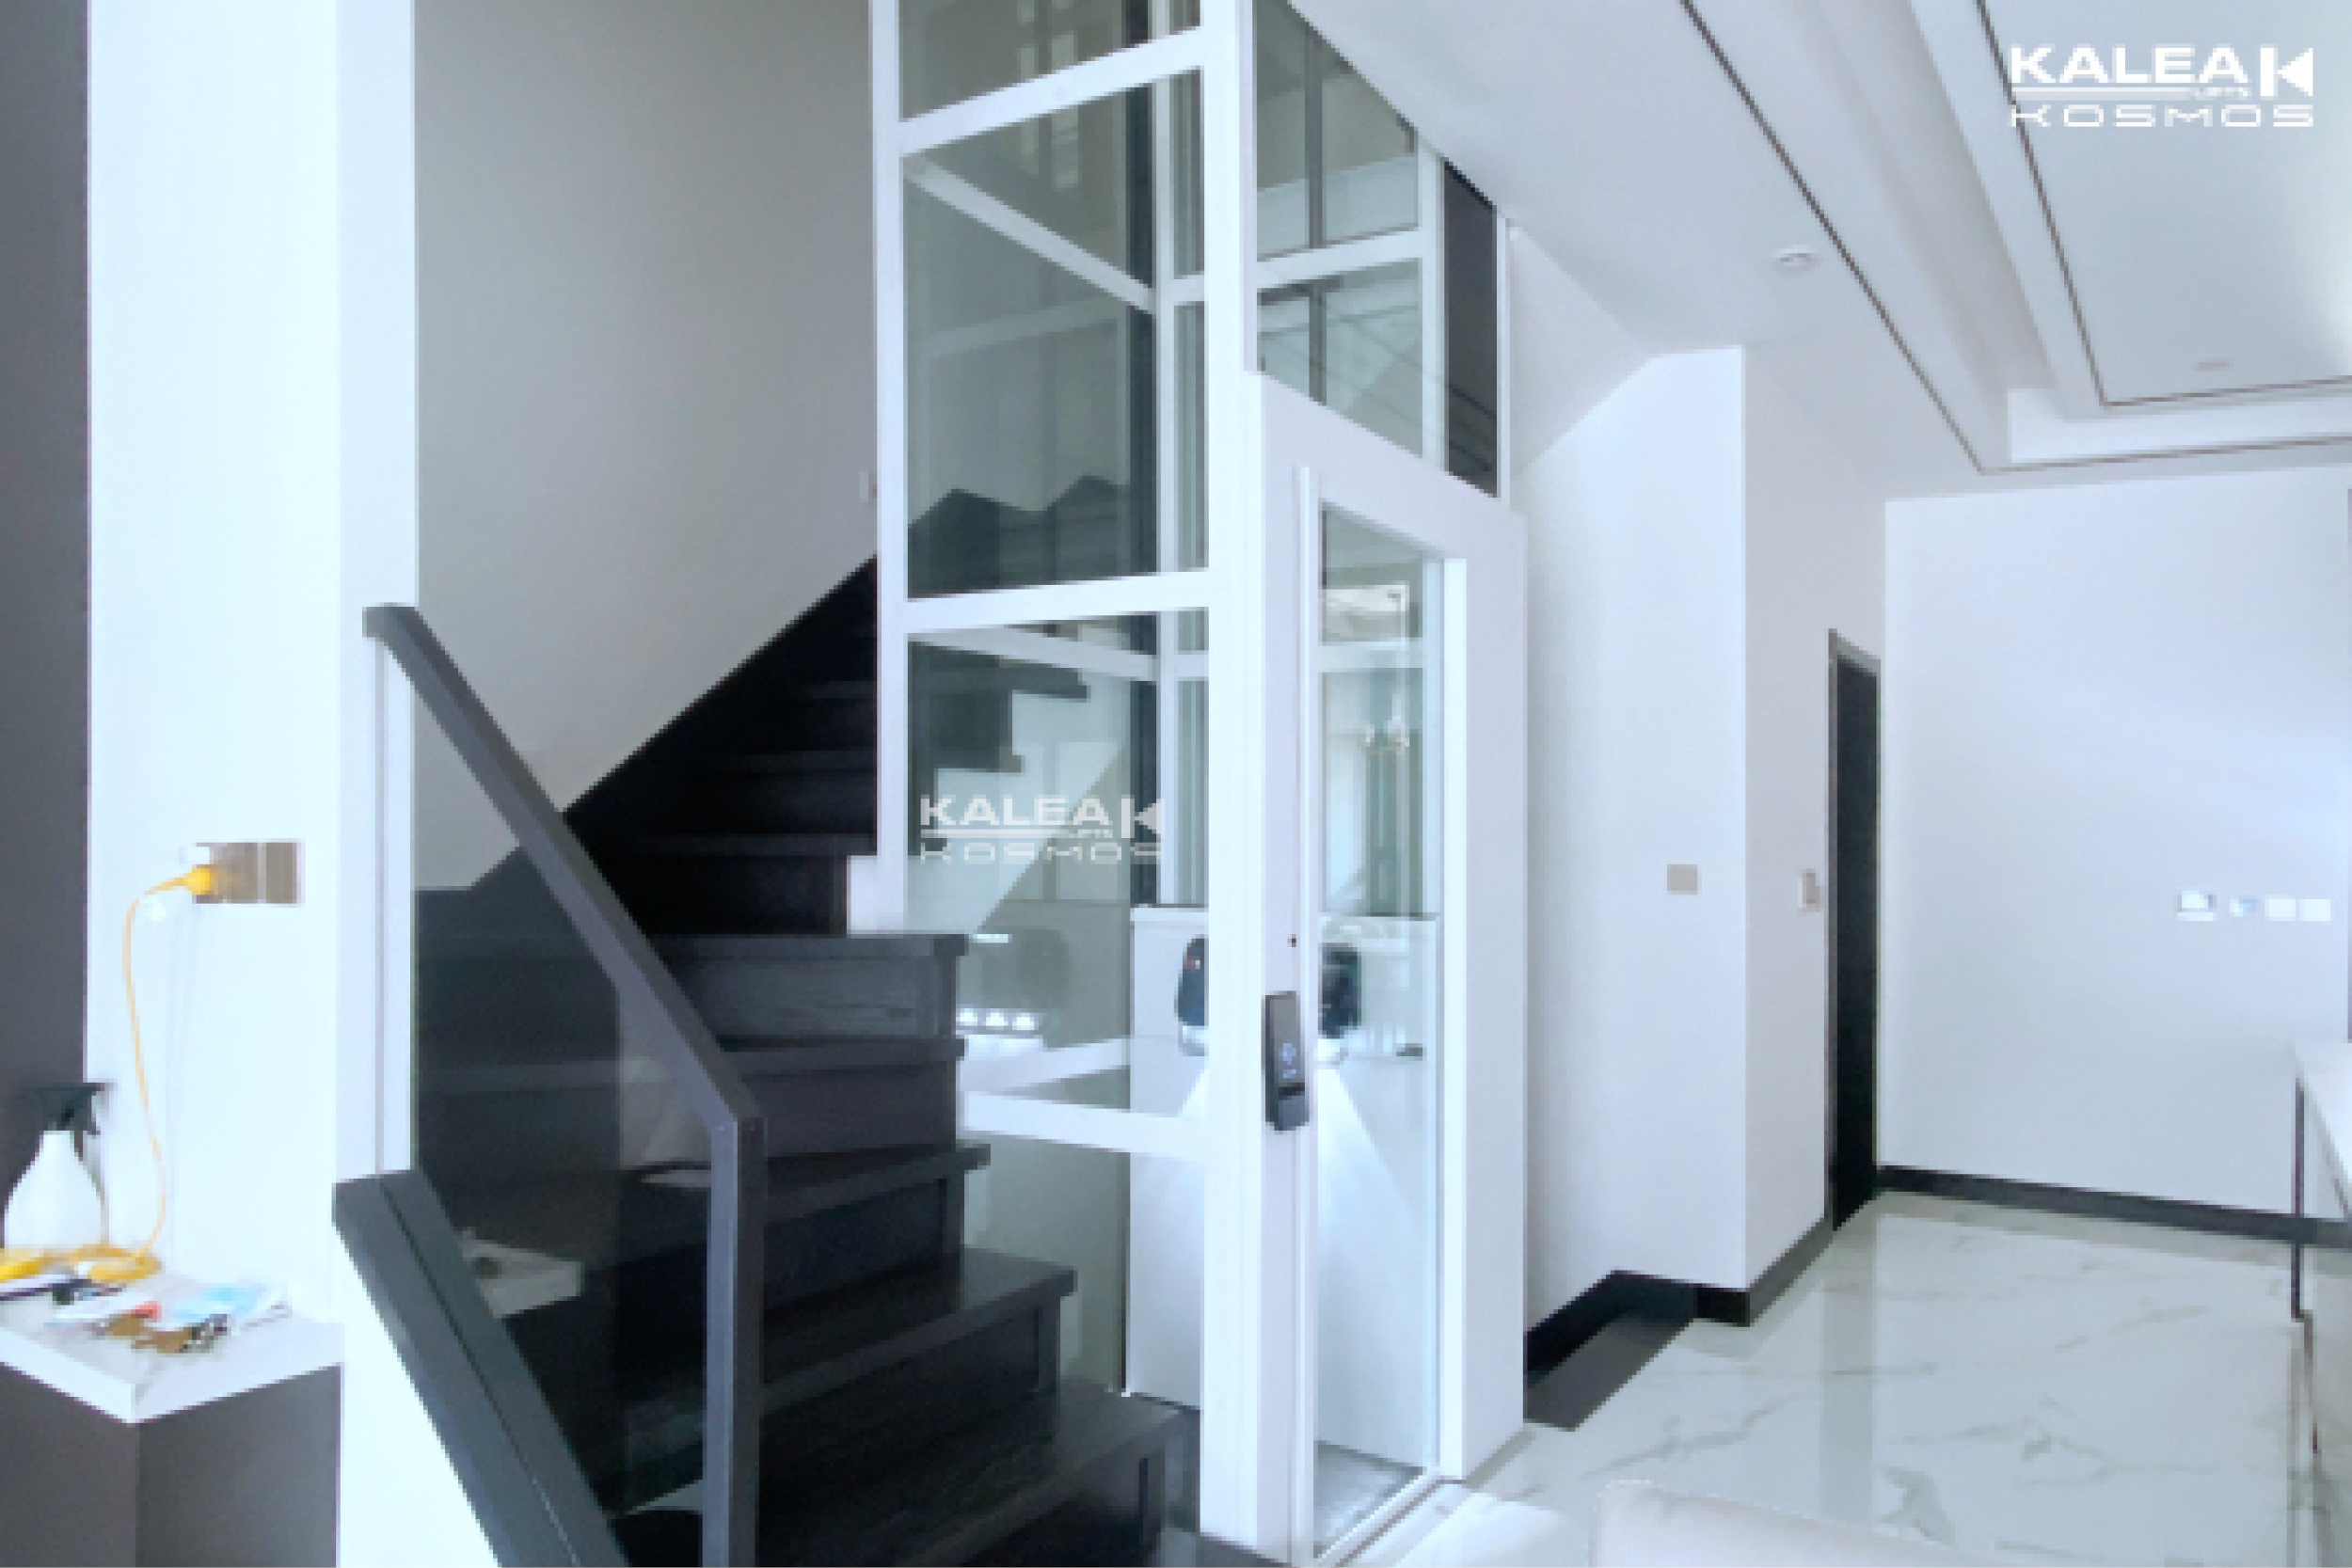 Private Home Middle Of Stair,Kosmos K60 model, All Glass Shaft Powder Coated Roman Gold